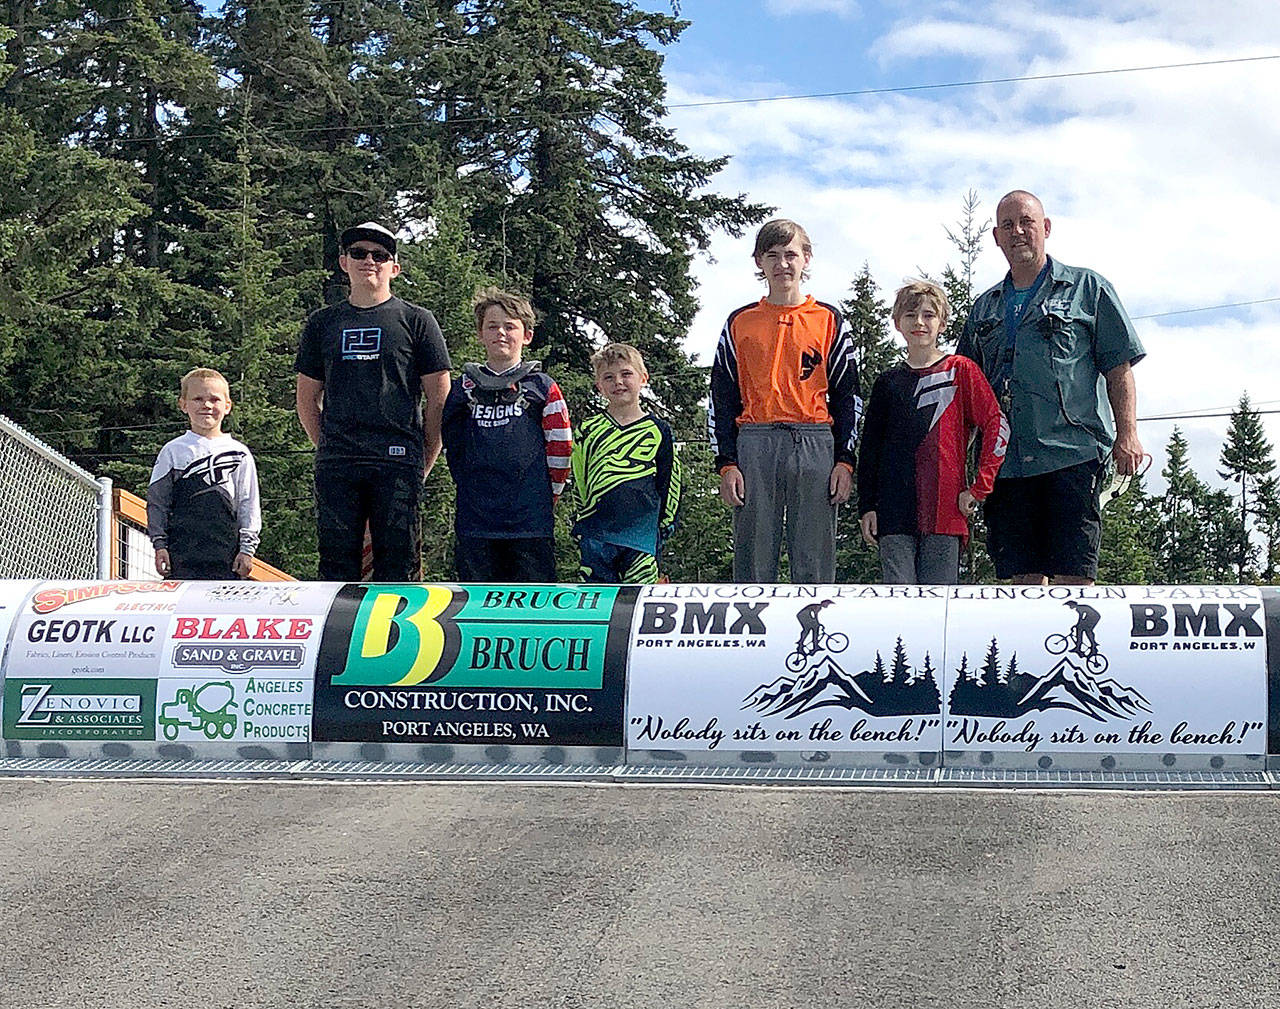 From left, Thomas Dalgardno, Andy Goldsbary, Cash Coleman, Zebastian Ferrier-Dixon, Mason Beal and Jackson Beal teamed up to raised $1,580 during the Race for Life event at the Lincoln Park BMX Track. Not pictured are Evan Hernandez and George Williams. The proceeds are going to the Leukemia and Lymphoma Society. The track also raised $1,350. (Dave Logan/for Peninsula Daily News)